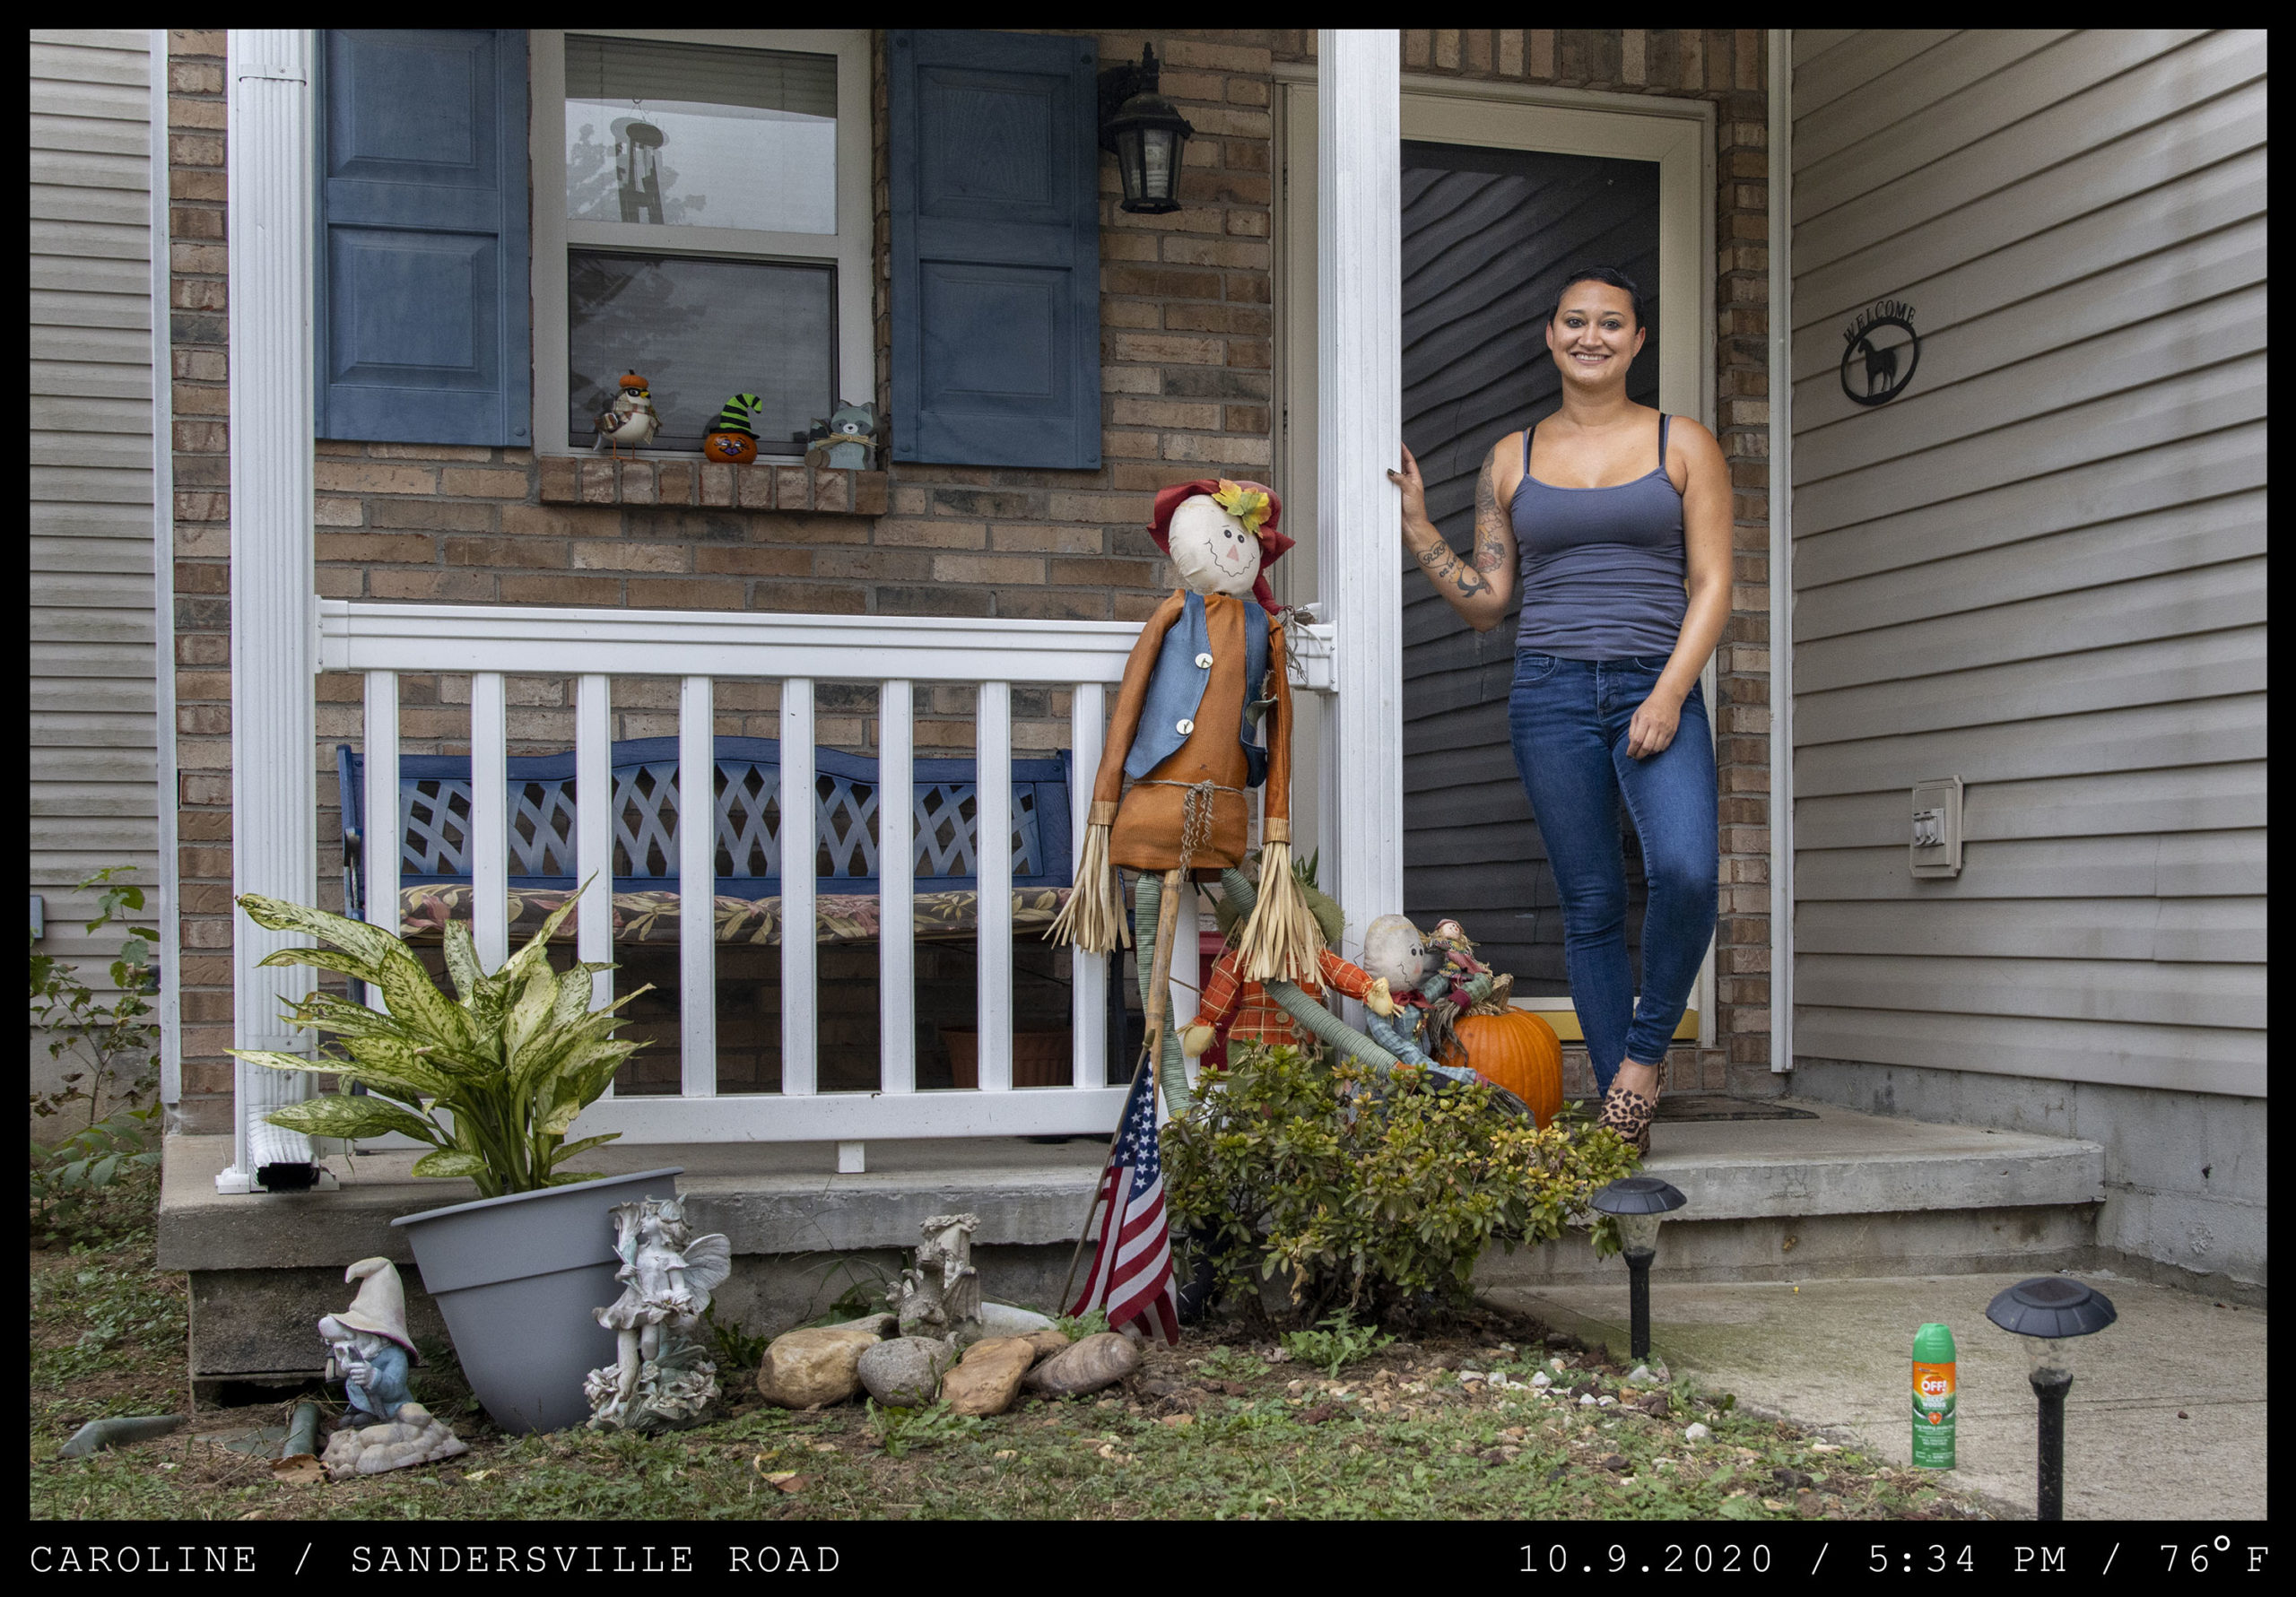 A woman in a gray tank top stands on a front porch featuring Fall decorations and a small American flag.